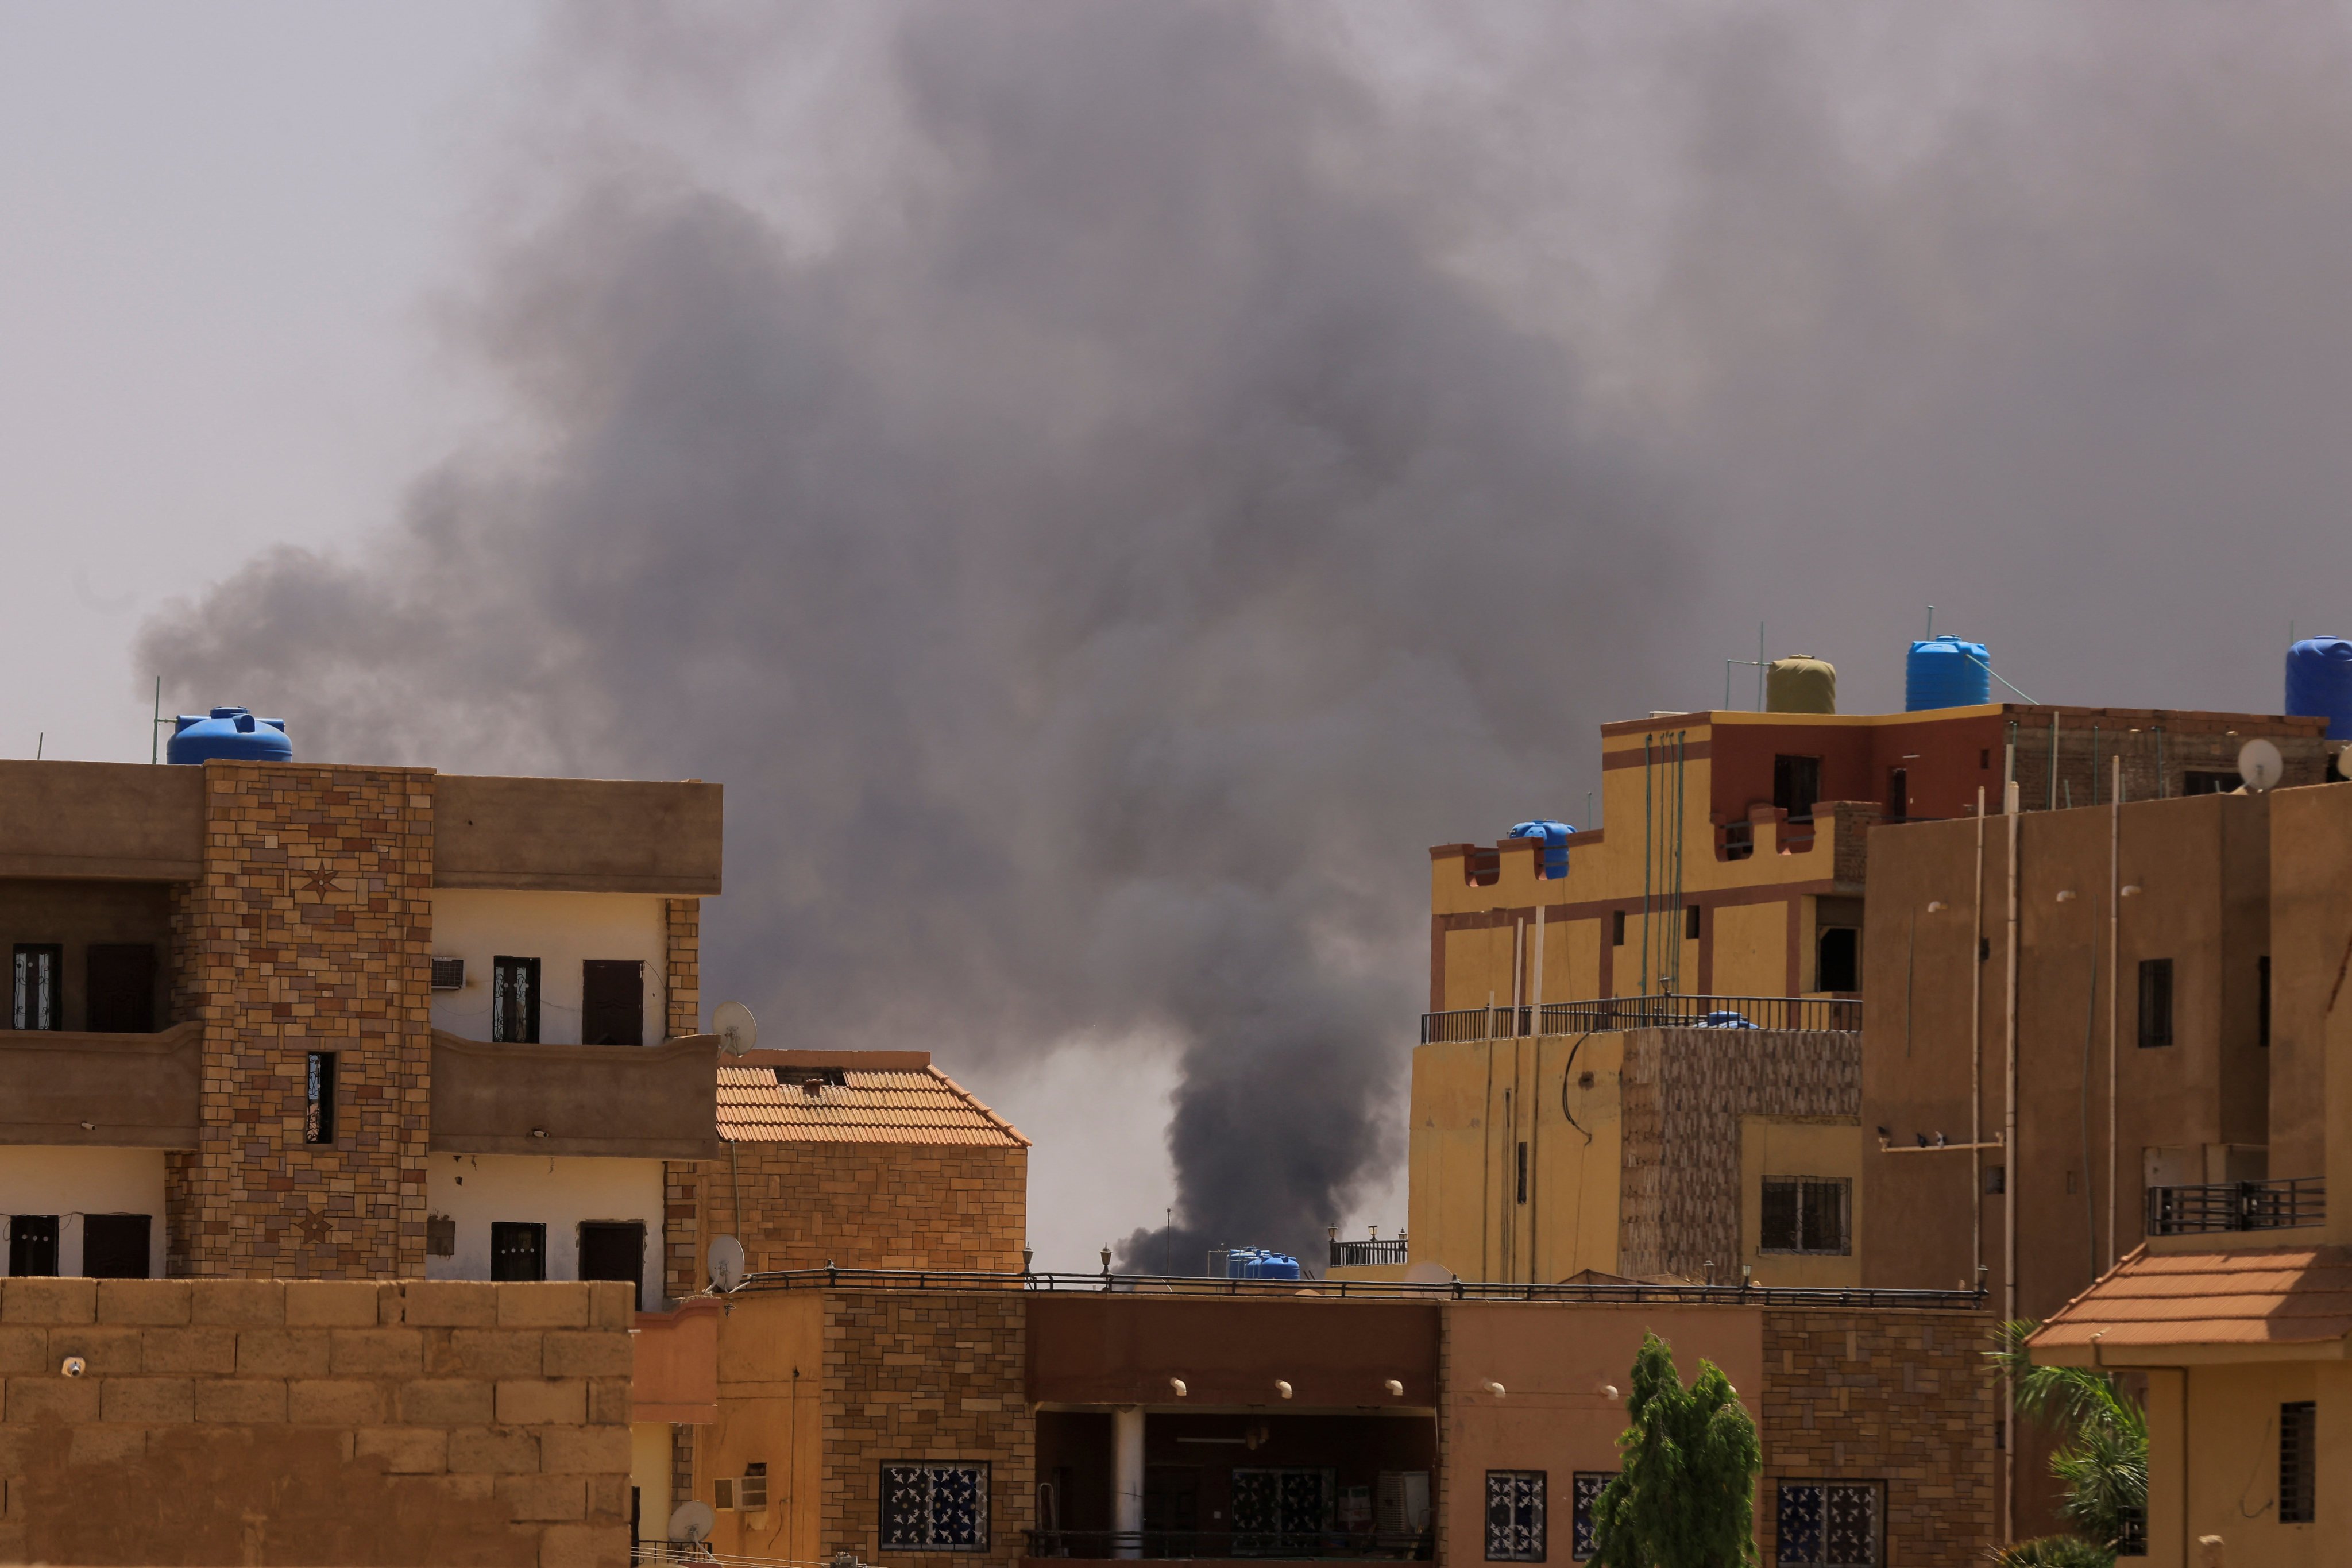 Smoke rises from buildings during clashes between the paramilitary Rapid Support Forces and the army in Khartoum, Sudan on Saturday. Photo: Reuters